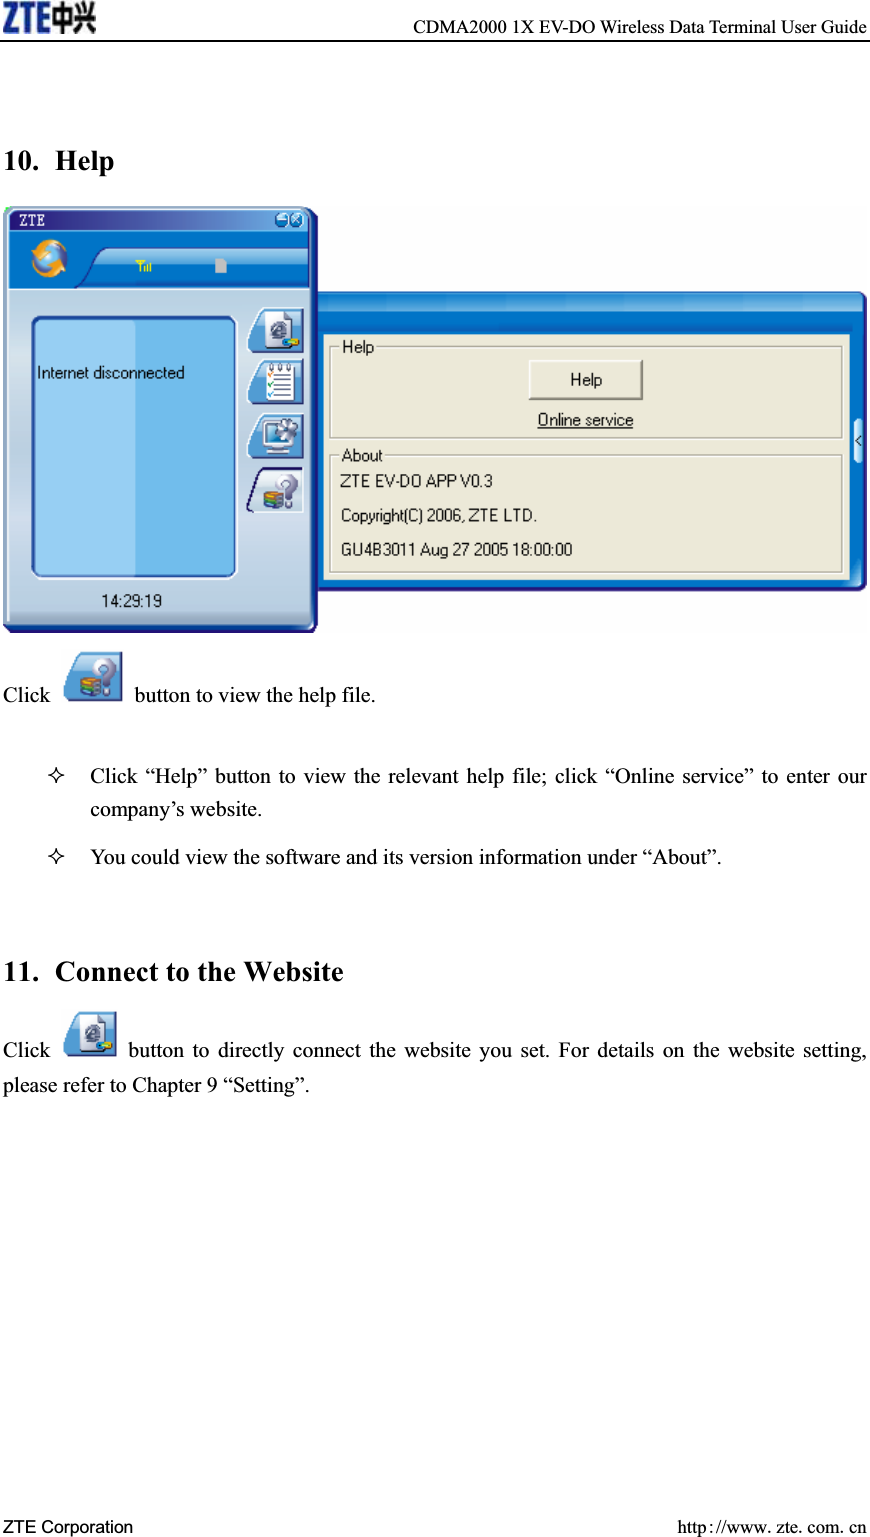     CDMA2000 1X EV-DO Wireless Data Terminal User Guide ZTE Corporation  http//wwwztecomcn10. Help Click    button to view the help file.   Click “Help” button to view the relevant help file; click “Online service” to enter our company’s website. You could view the software and its version information under “About”. 11.  Connect to the Website Click    button to directly connect the website you set. For details on the website setting, please refer to Chapter 9 “Setting”. 